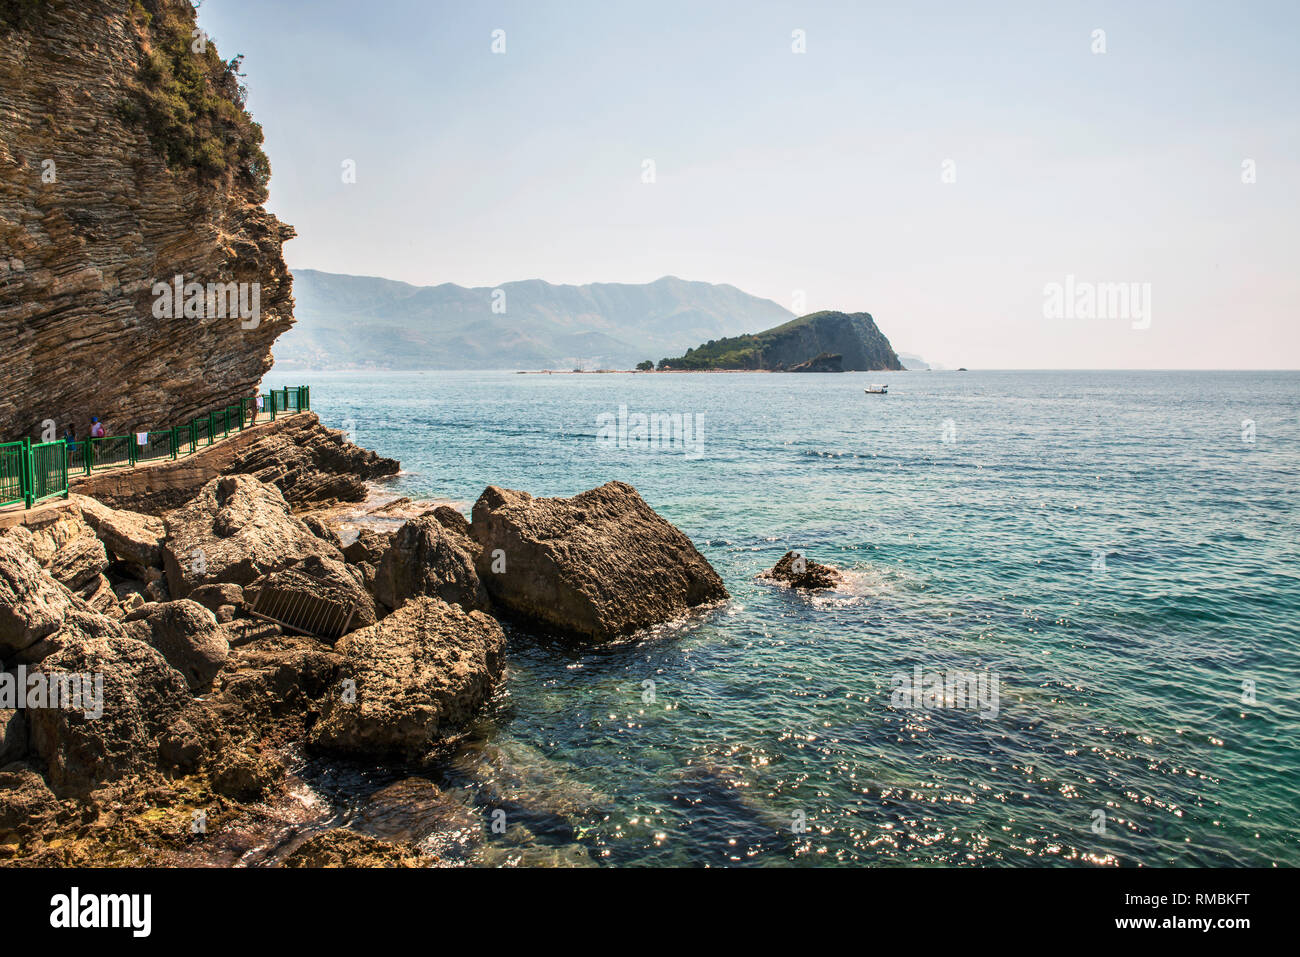 View of the island of St. Nicholas in the Gulf of the Adriatic Sea near the town of Budva, the famous tourist resort of Montenegro. Stock Photo